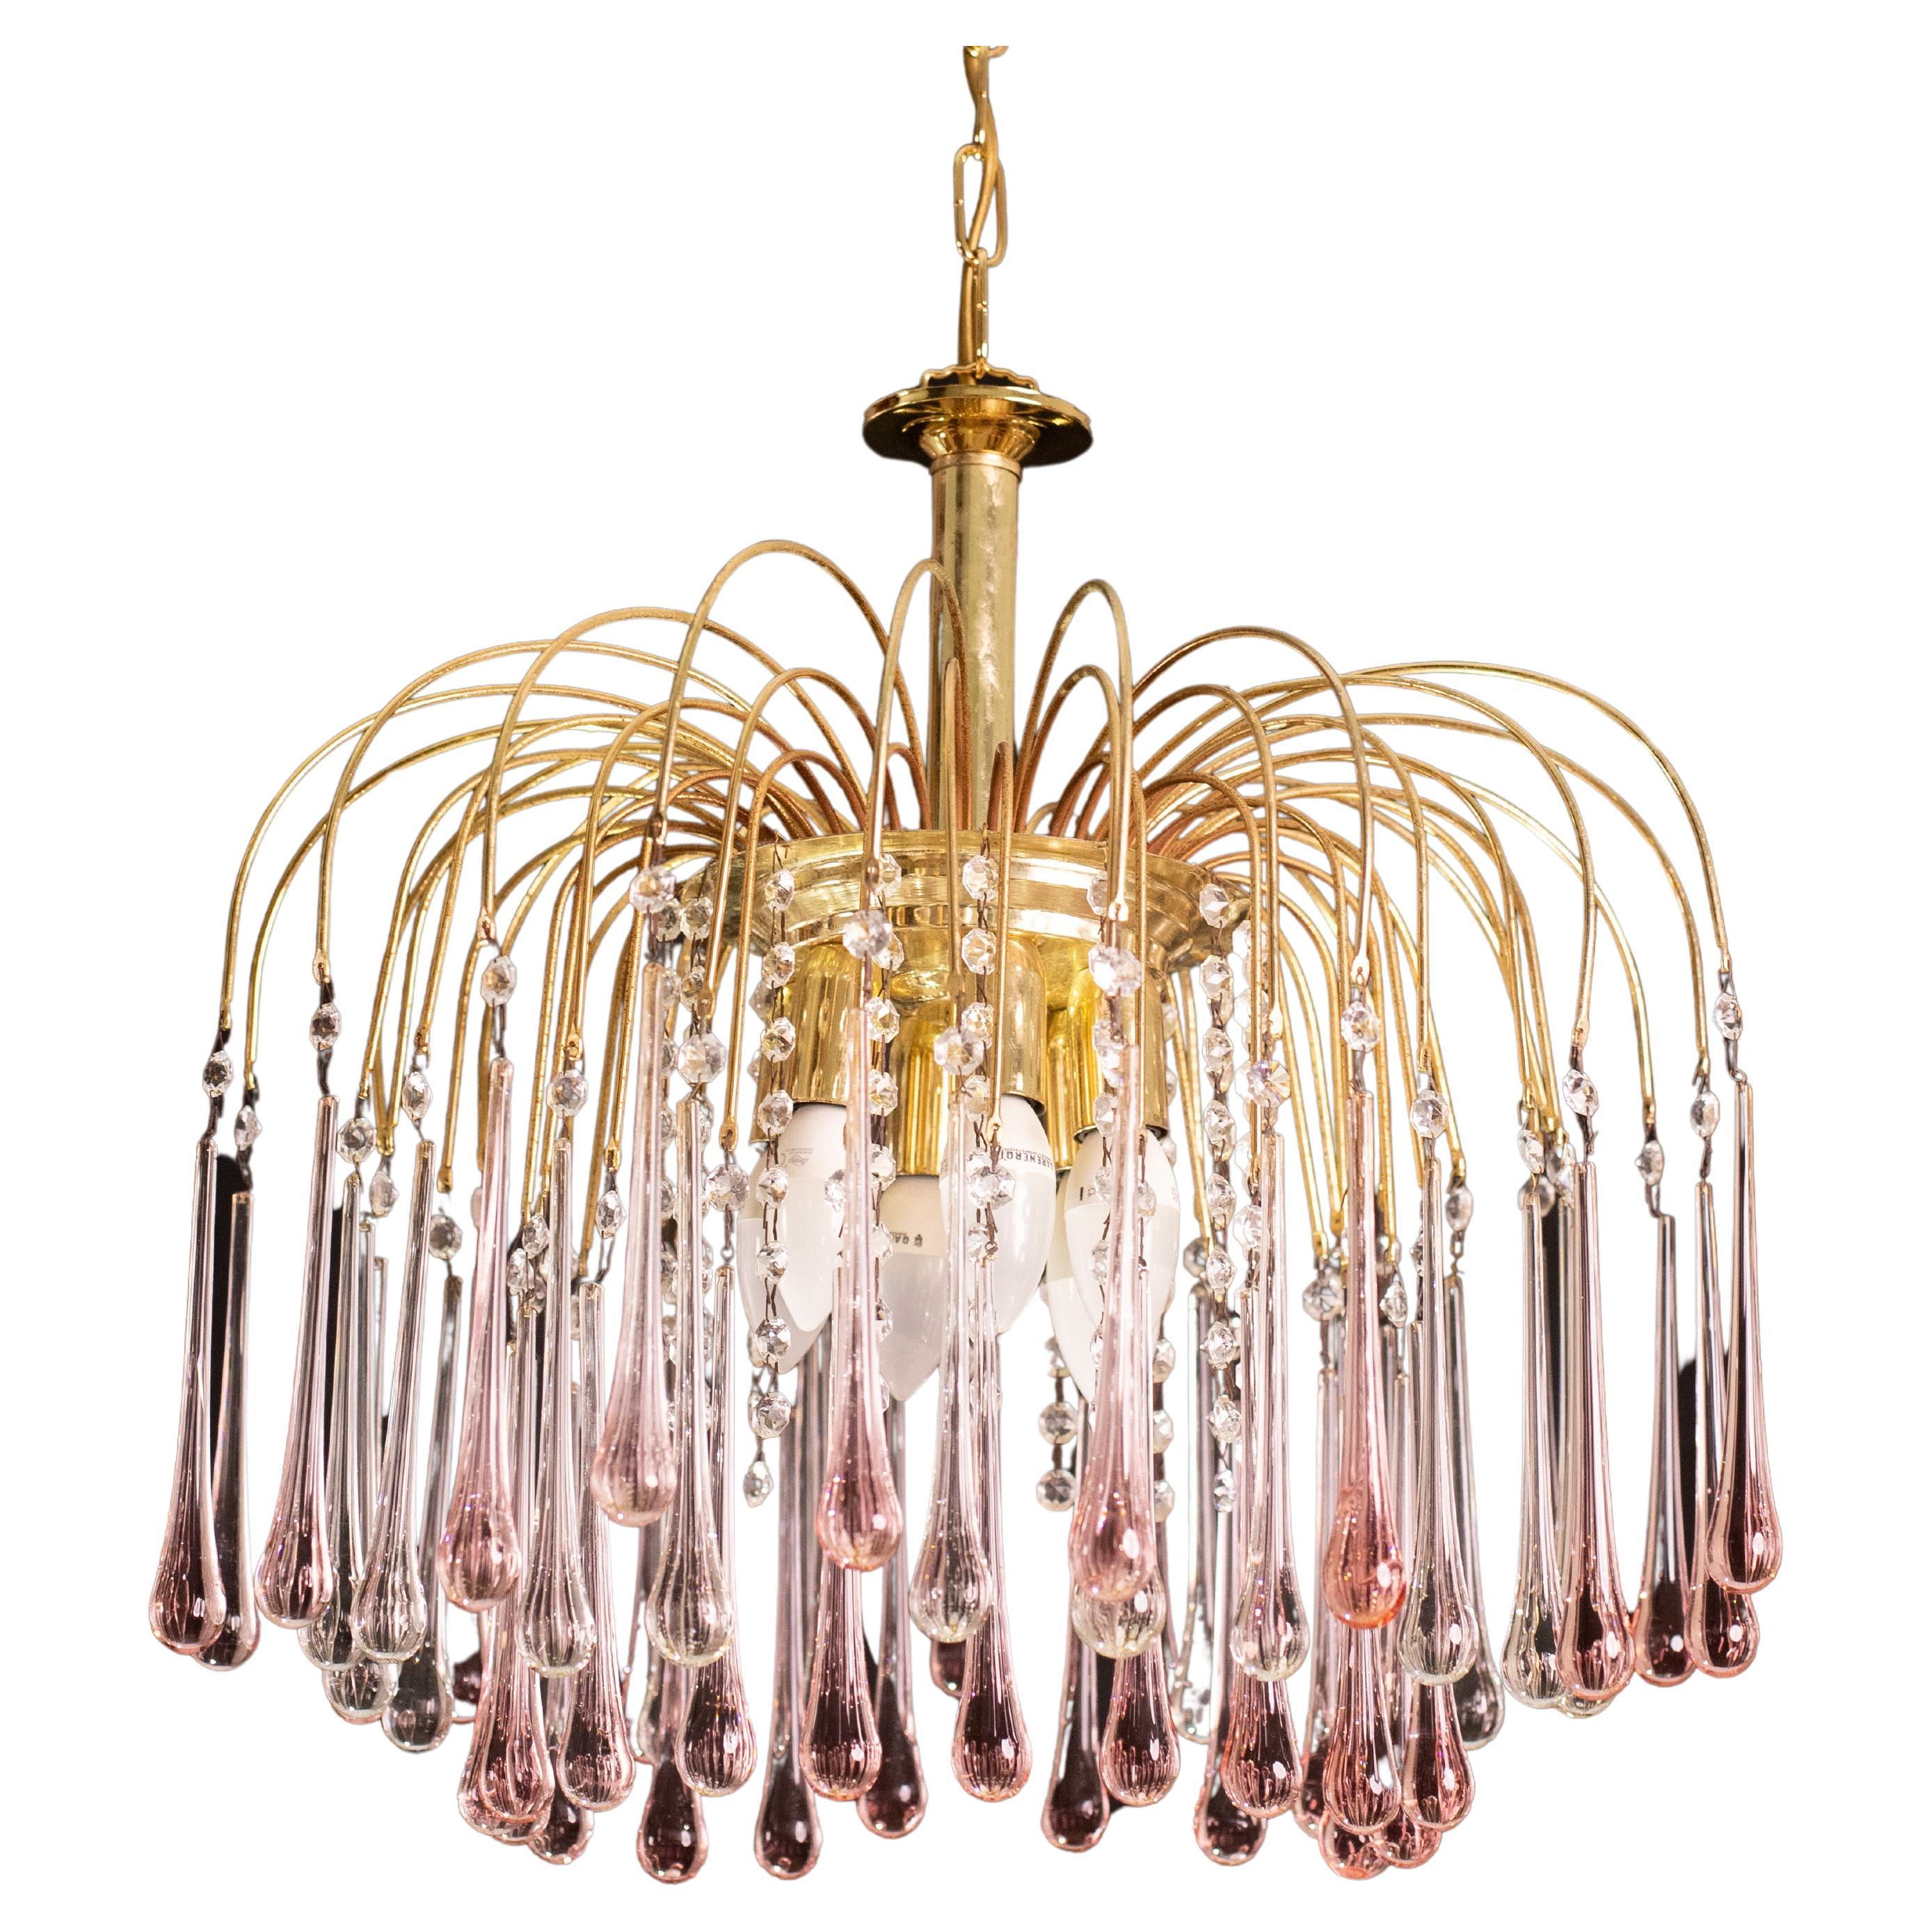 Lady Barbara, Murano Chandelier Pink and White Drops, Venini Style, 1970s